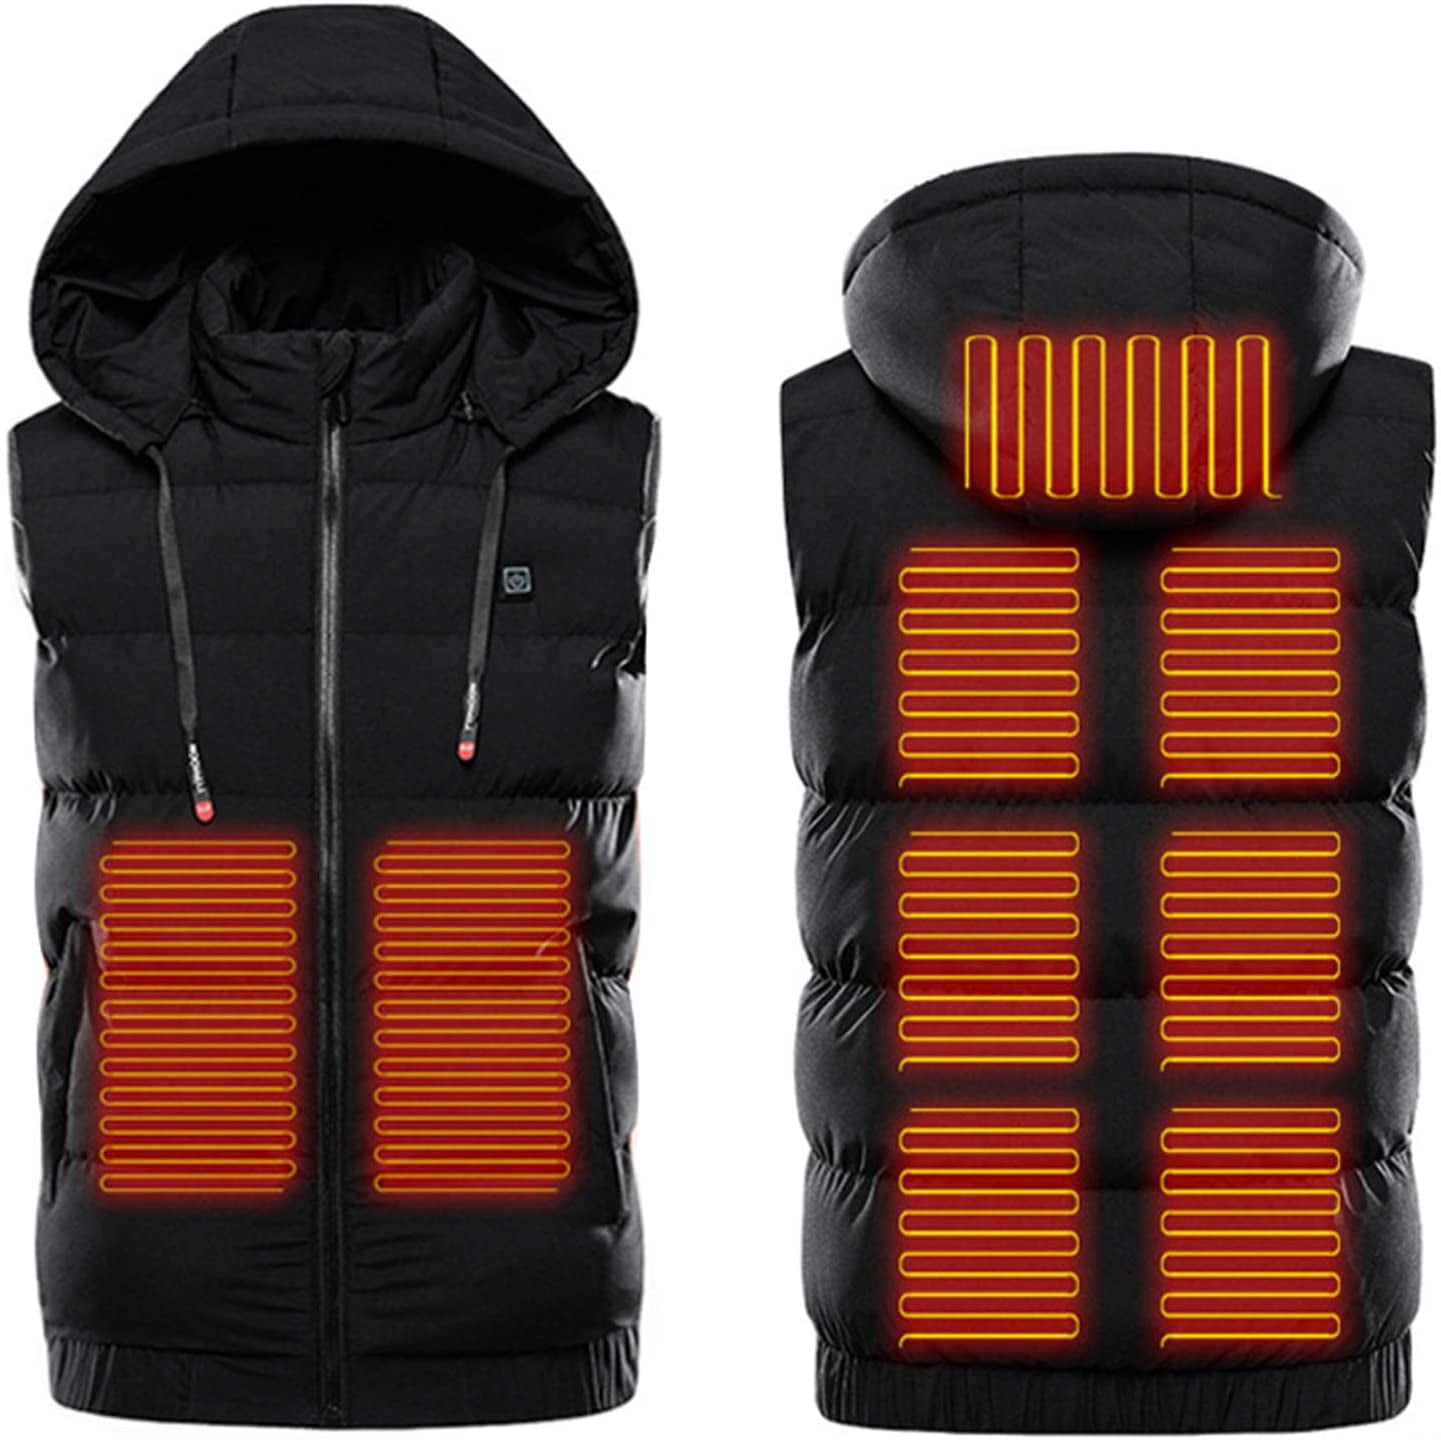 Mens Electric Heated Jacket Safe Warm Heating Waistcoat for Man 9 Heating Zones Women Lightweight Electric Heated Gilet 3 Temperature Levels USB Heated Vest for Outdoors Camping Hiking 